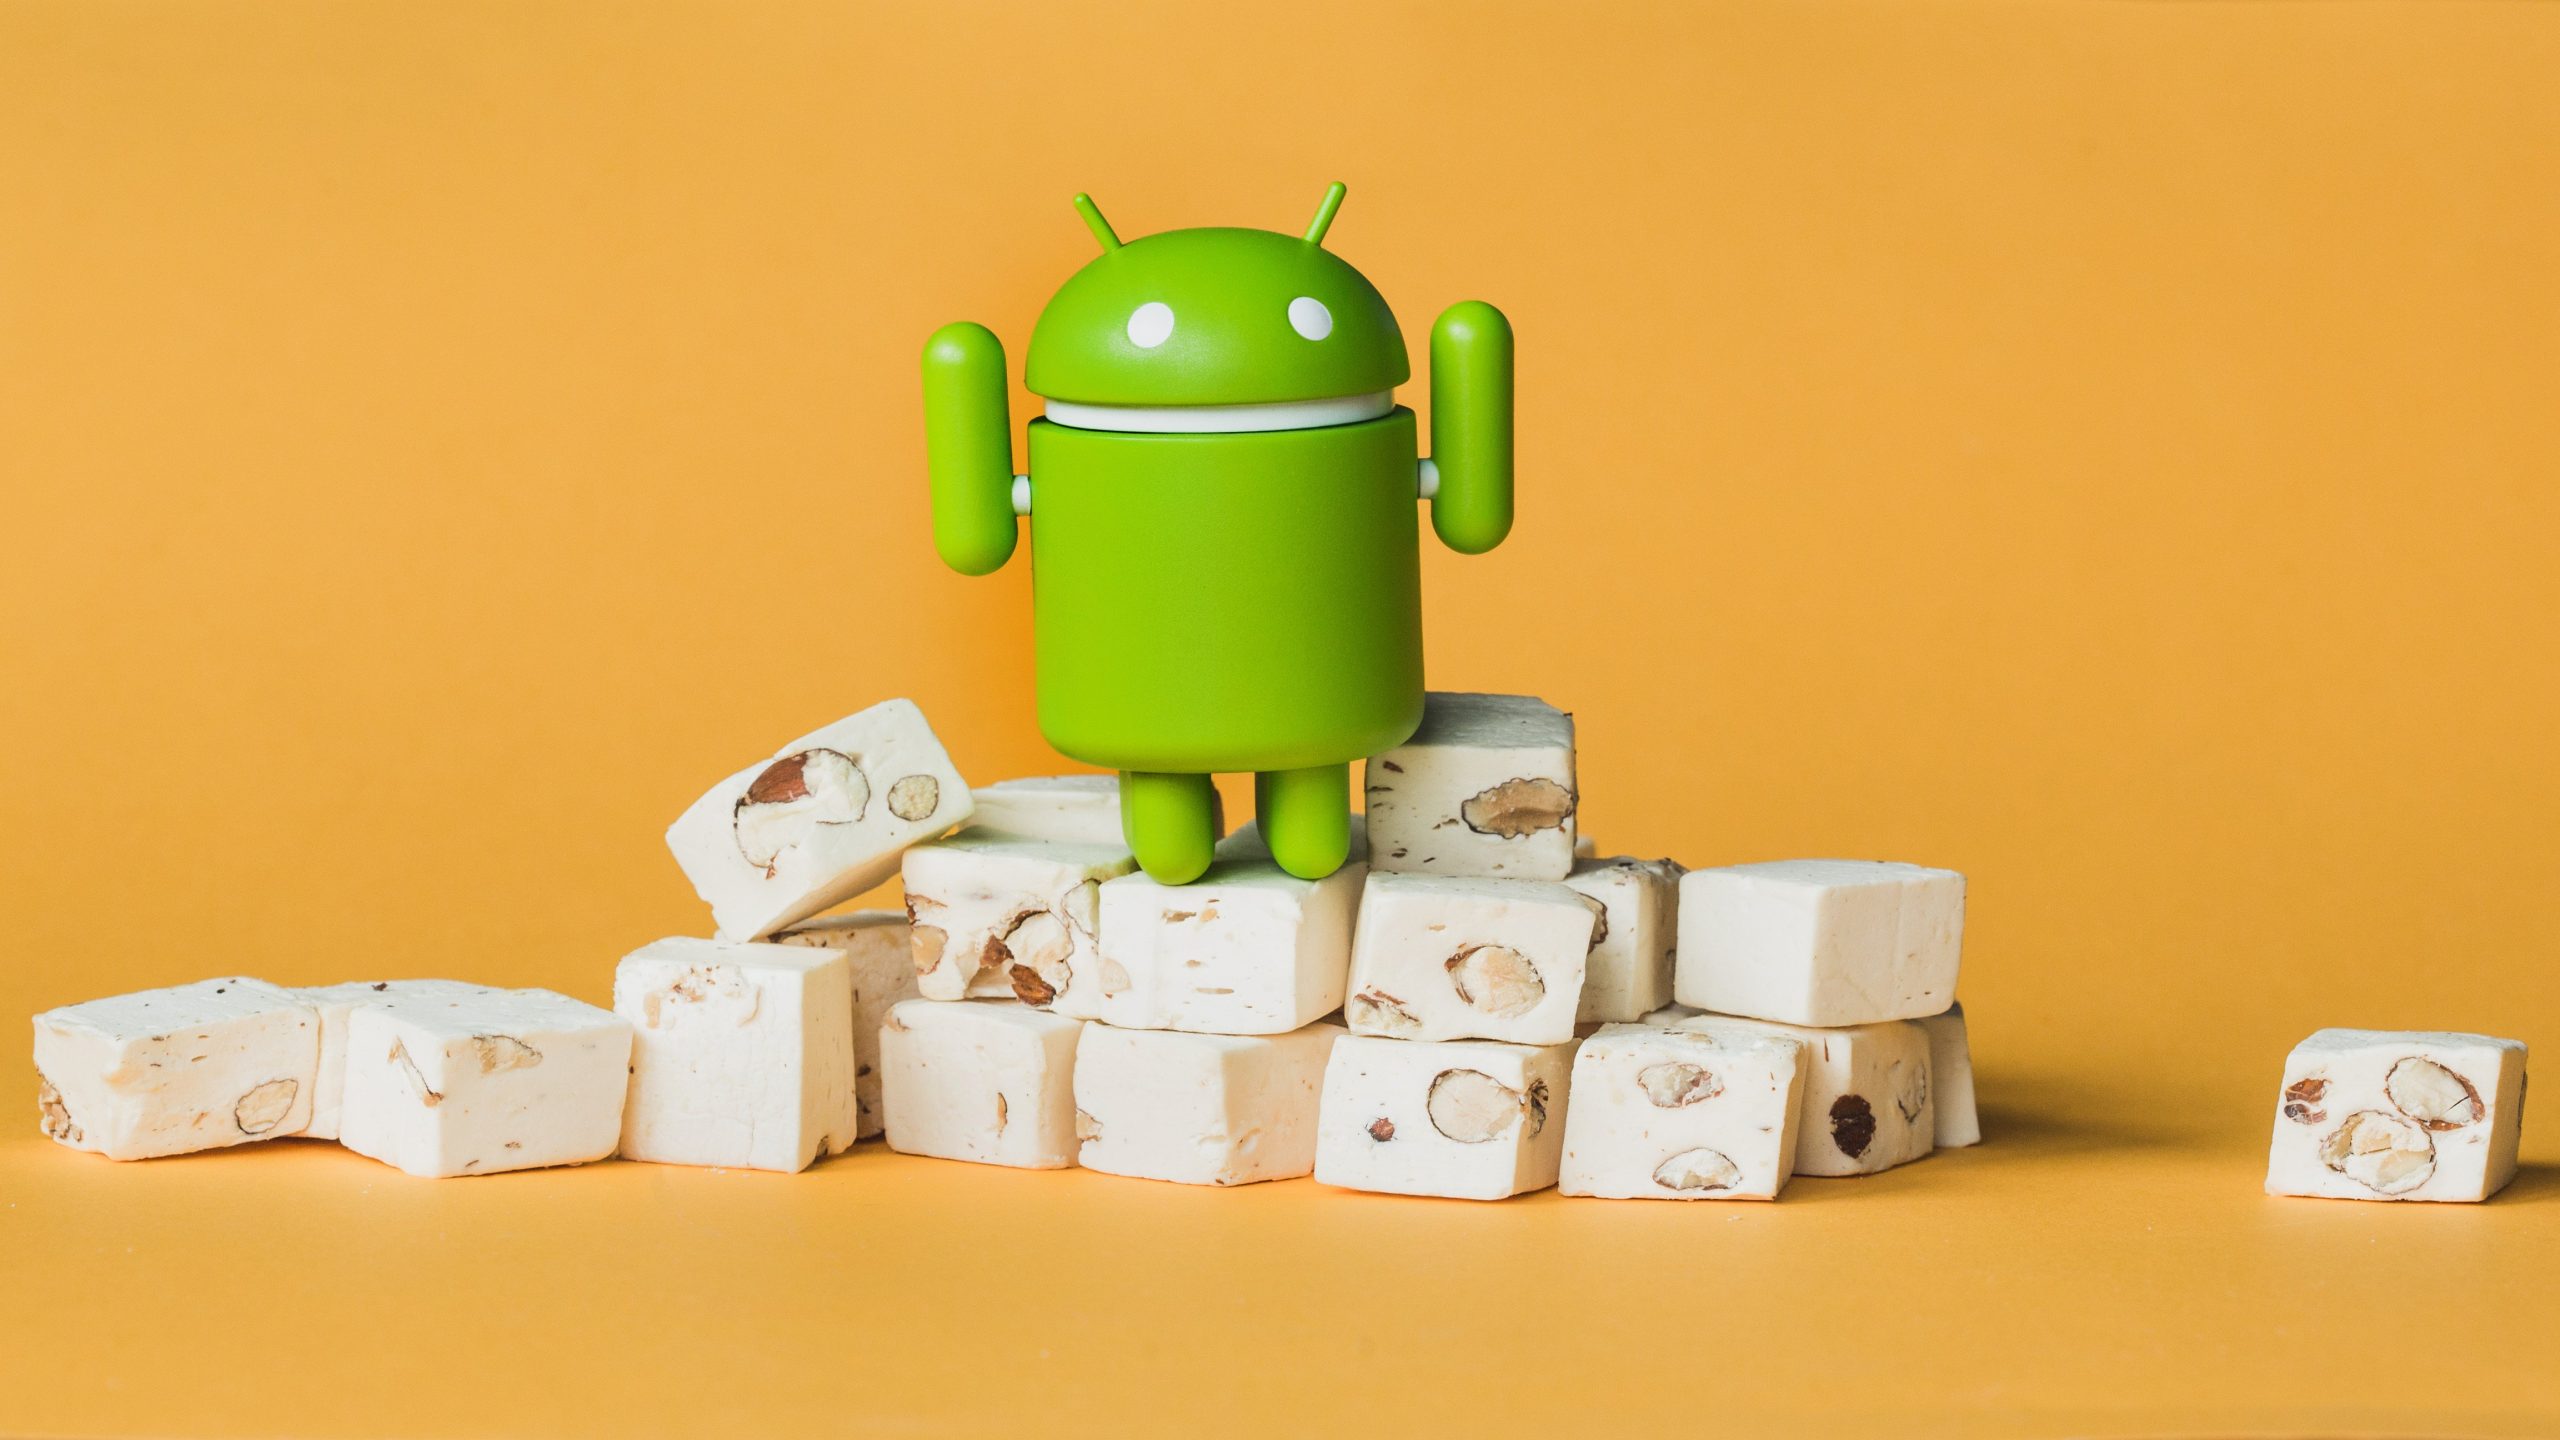 Android 7.1.2 Nougat On HTC One M8